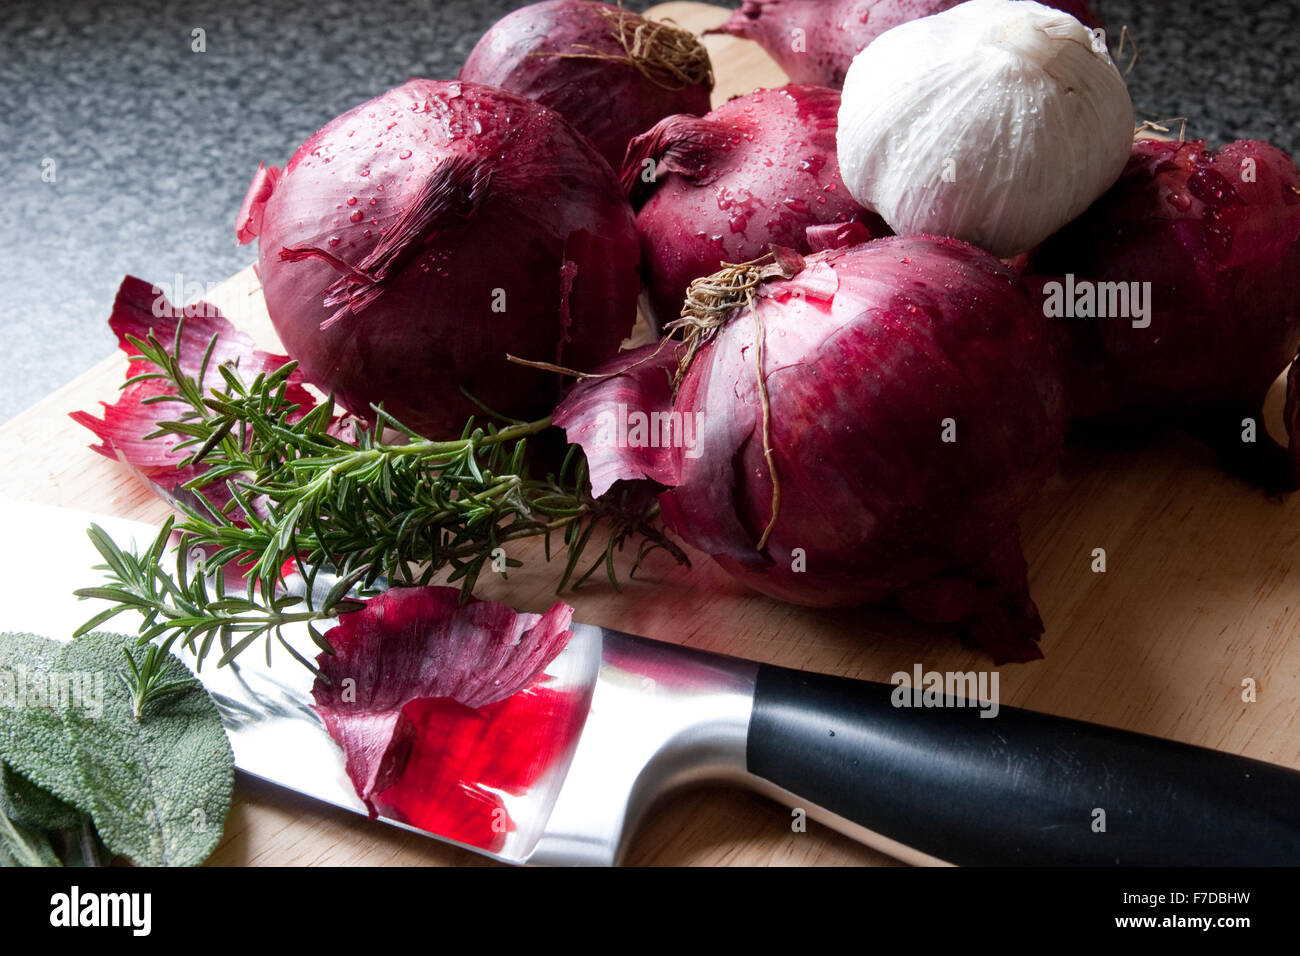 Whole red onions, a garlic bulb, rosemary and sage on a wooden chopping board with a chefs knife Stock Photo